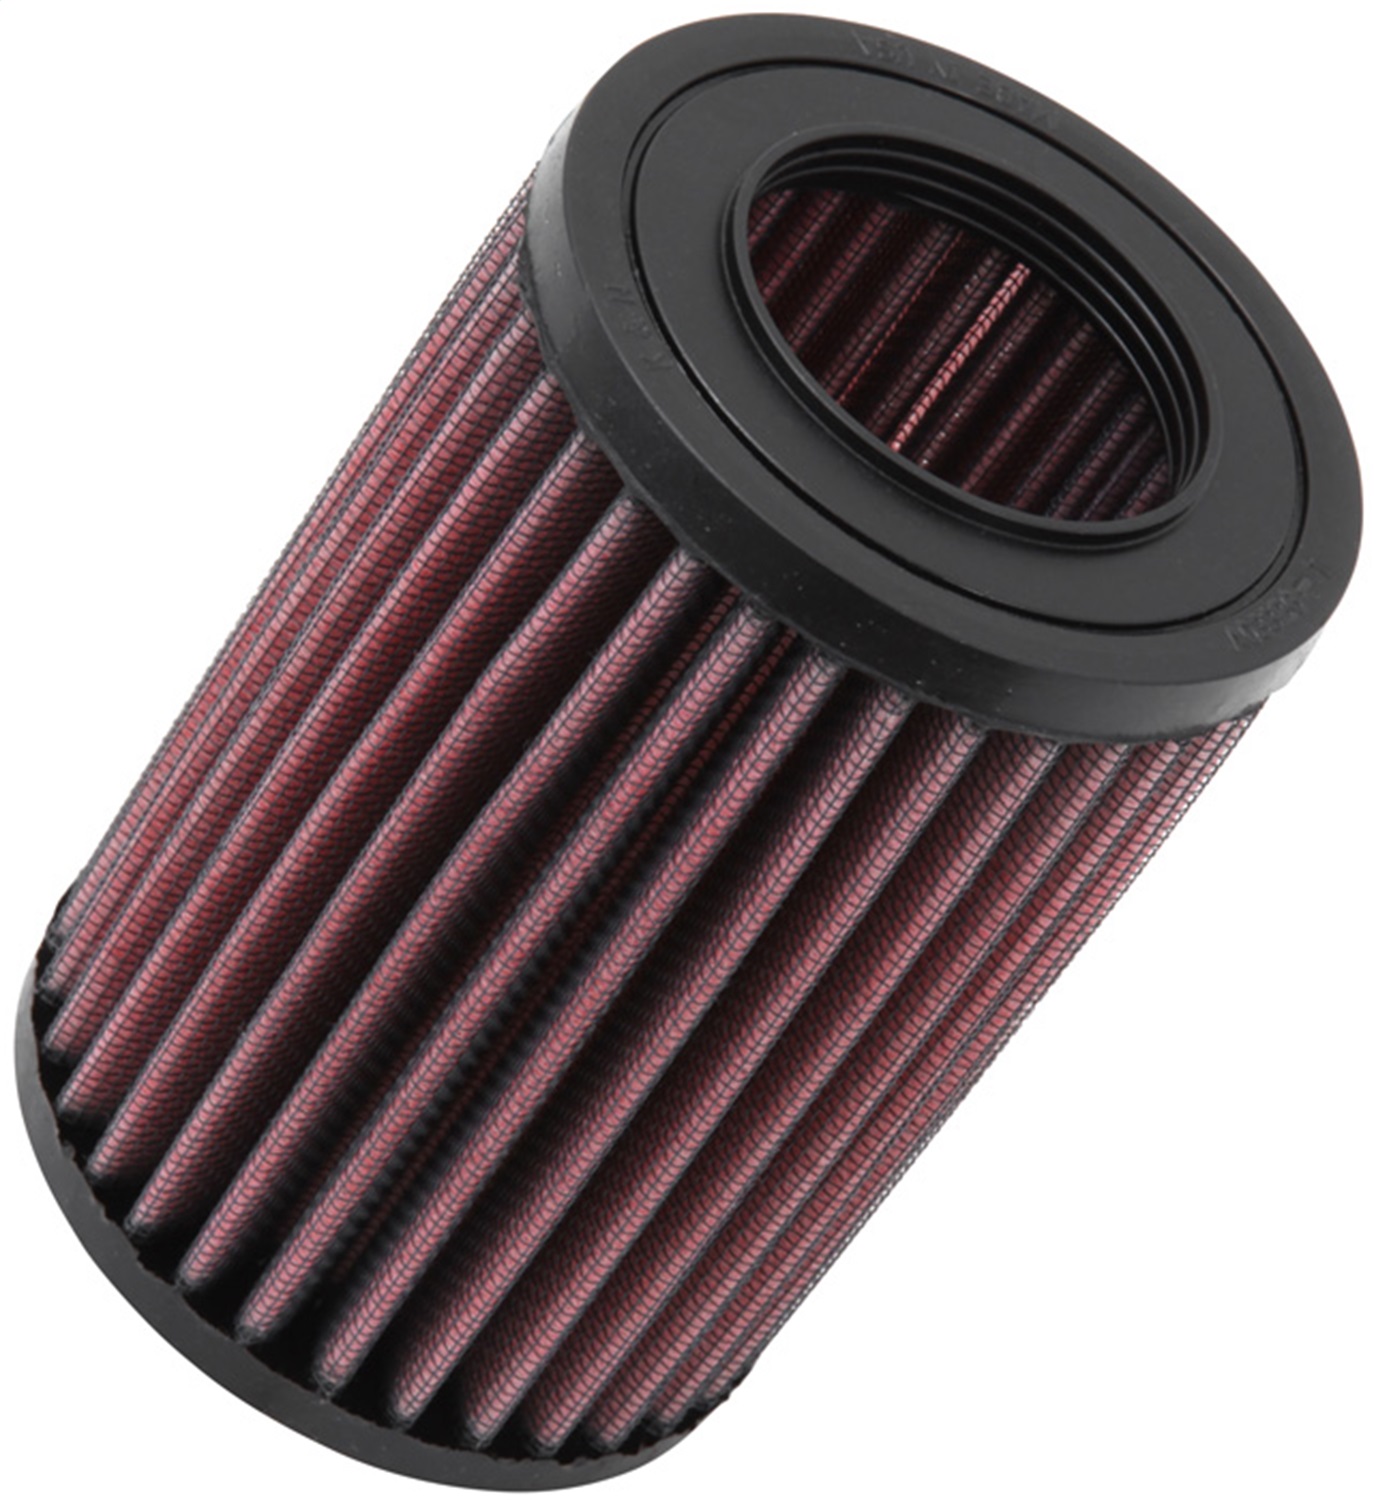 K&N Filters K&N Filters E-9257 Air Filter Fits 05-07 Fortwo